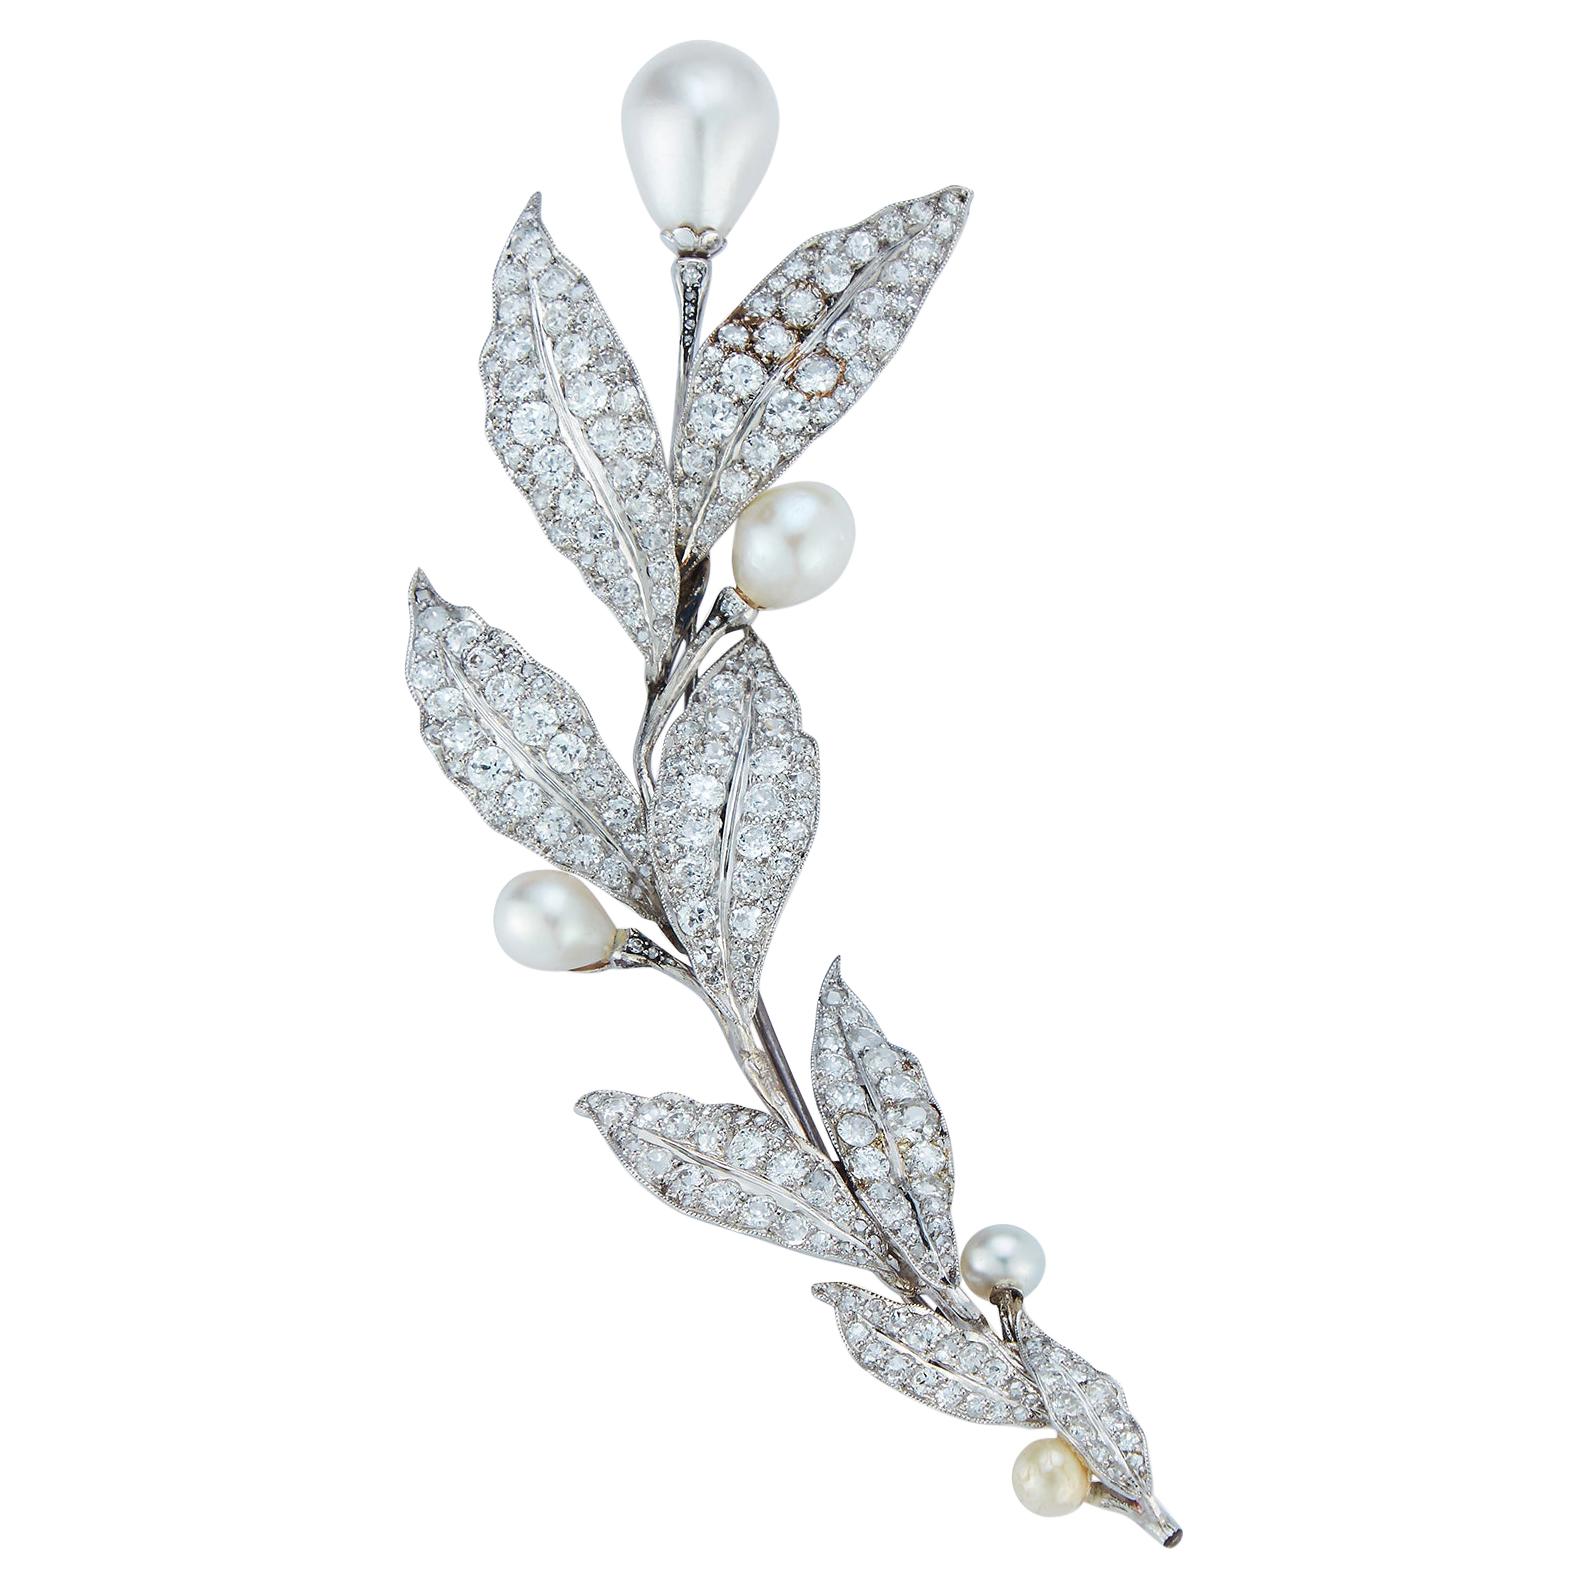 Belle Epoque Natural Pearl and Diamond Flower Brooch or Hairpiece